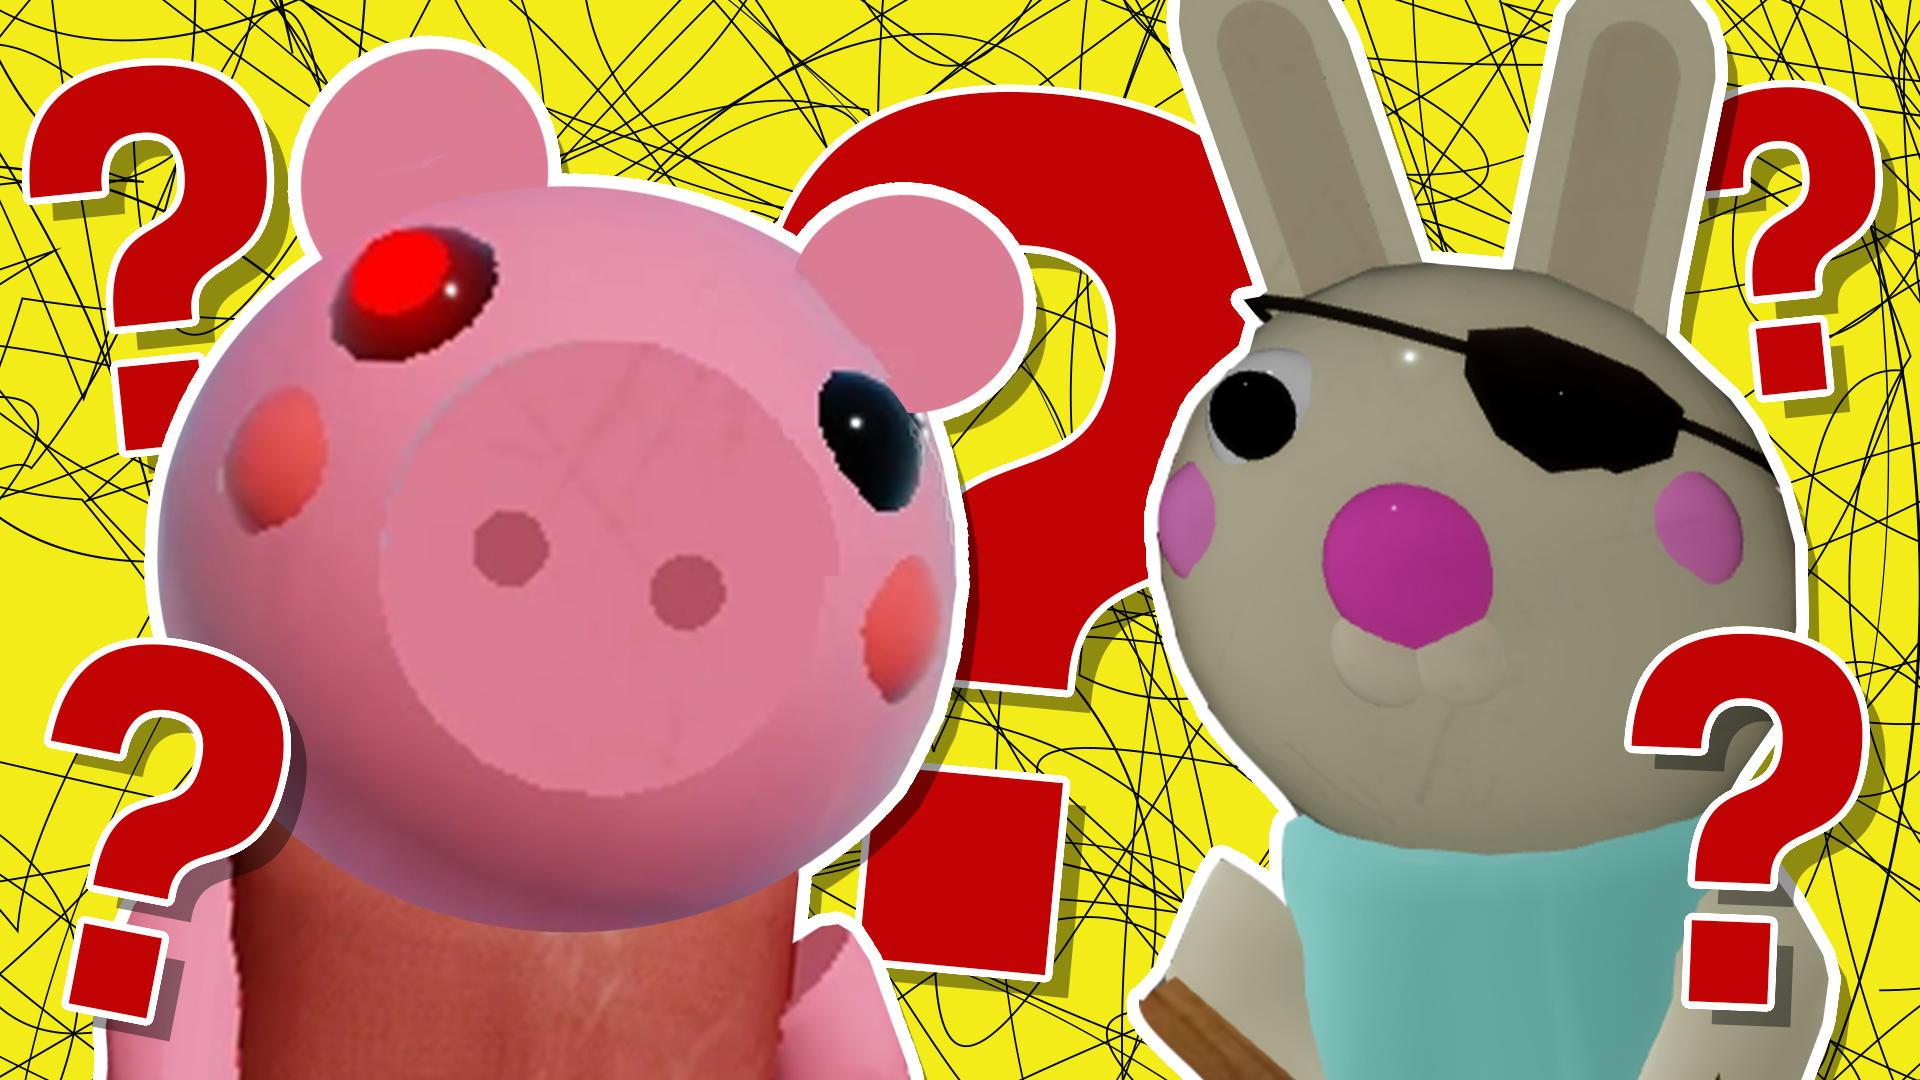 All About the Roblox Piggy Character You Should Know